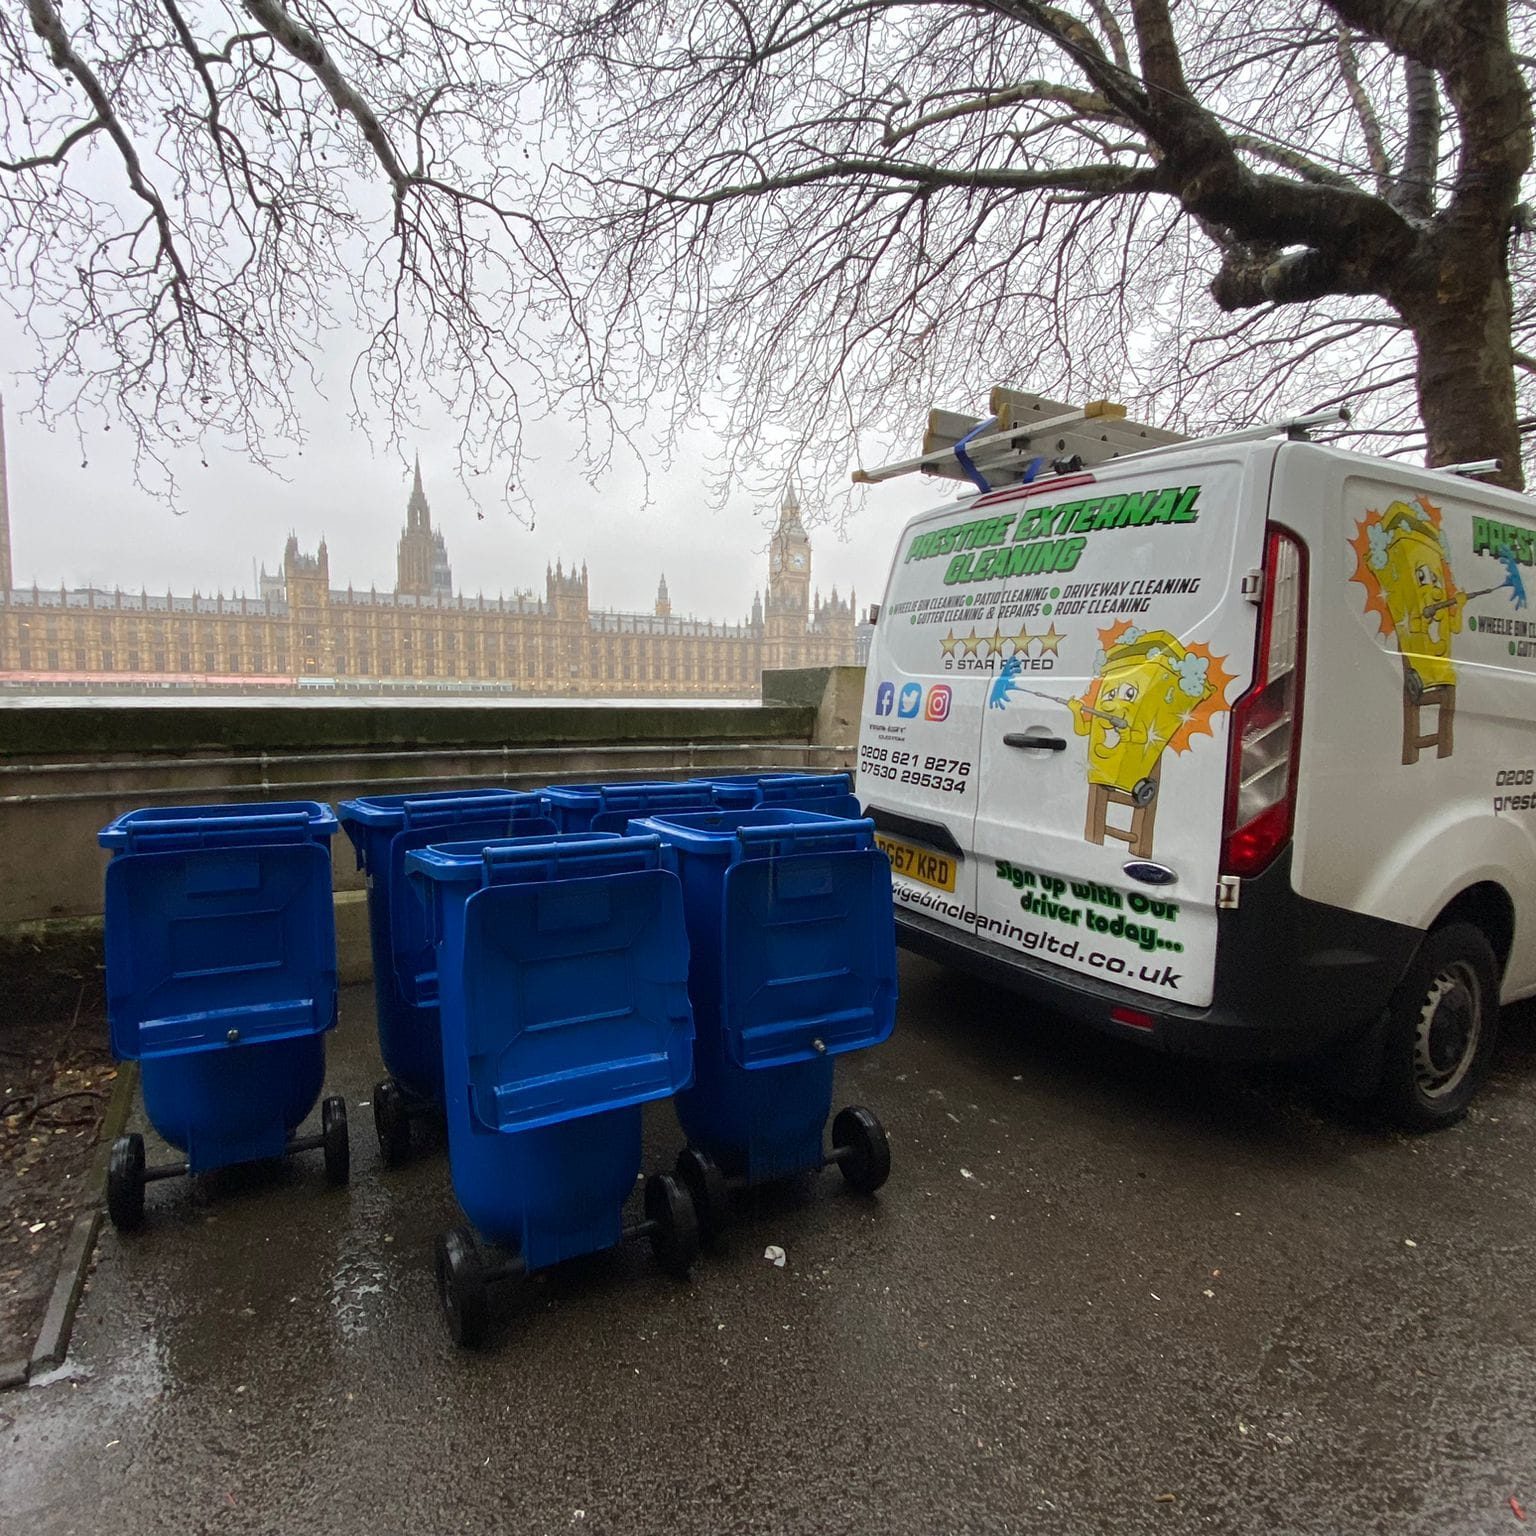 London Bin Cleaning by the River Thames